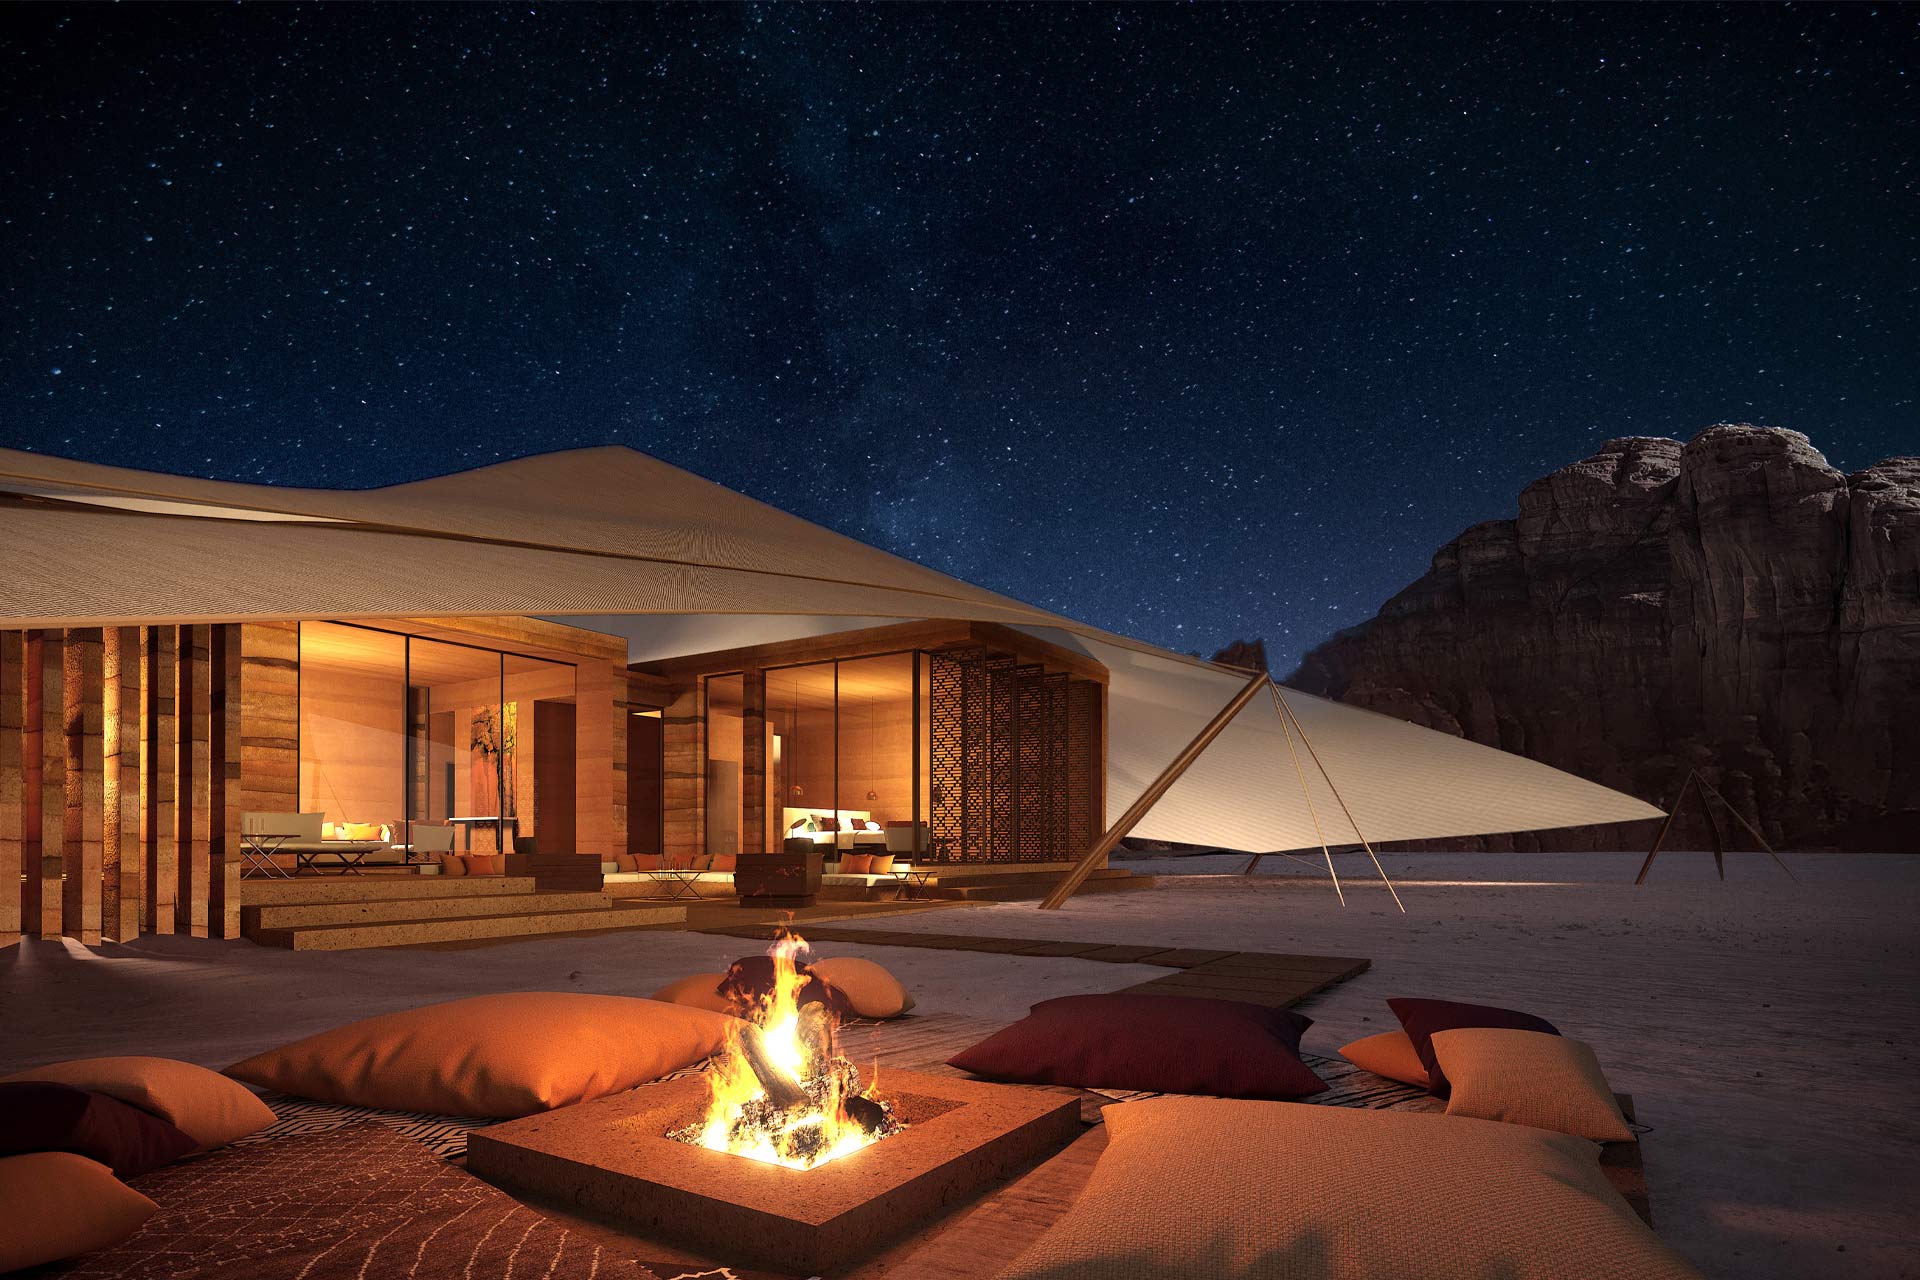 A rendering of a new tented camp in Saudi Arabia's Ashar Valley